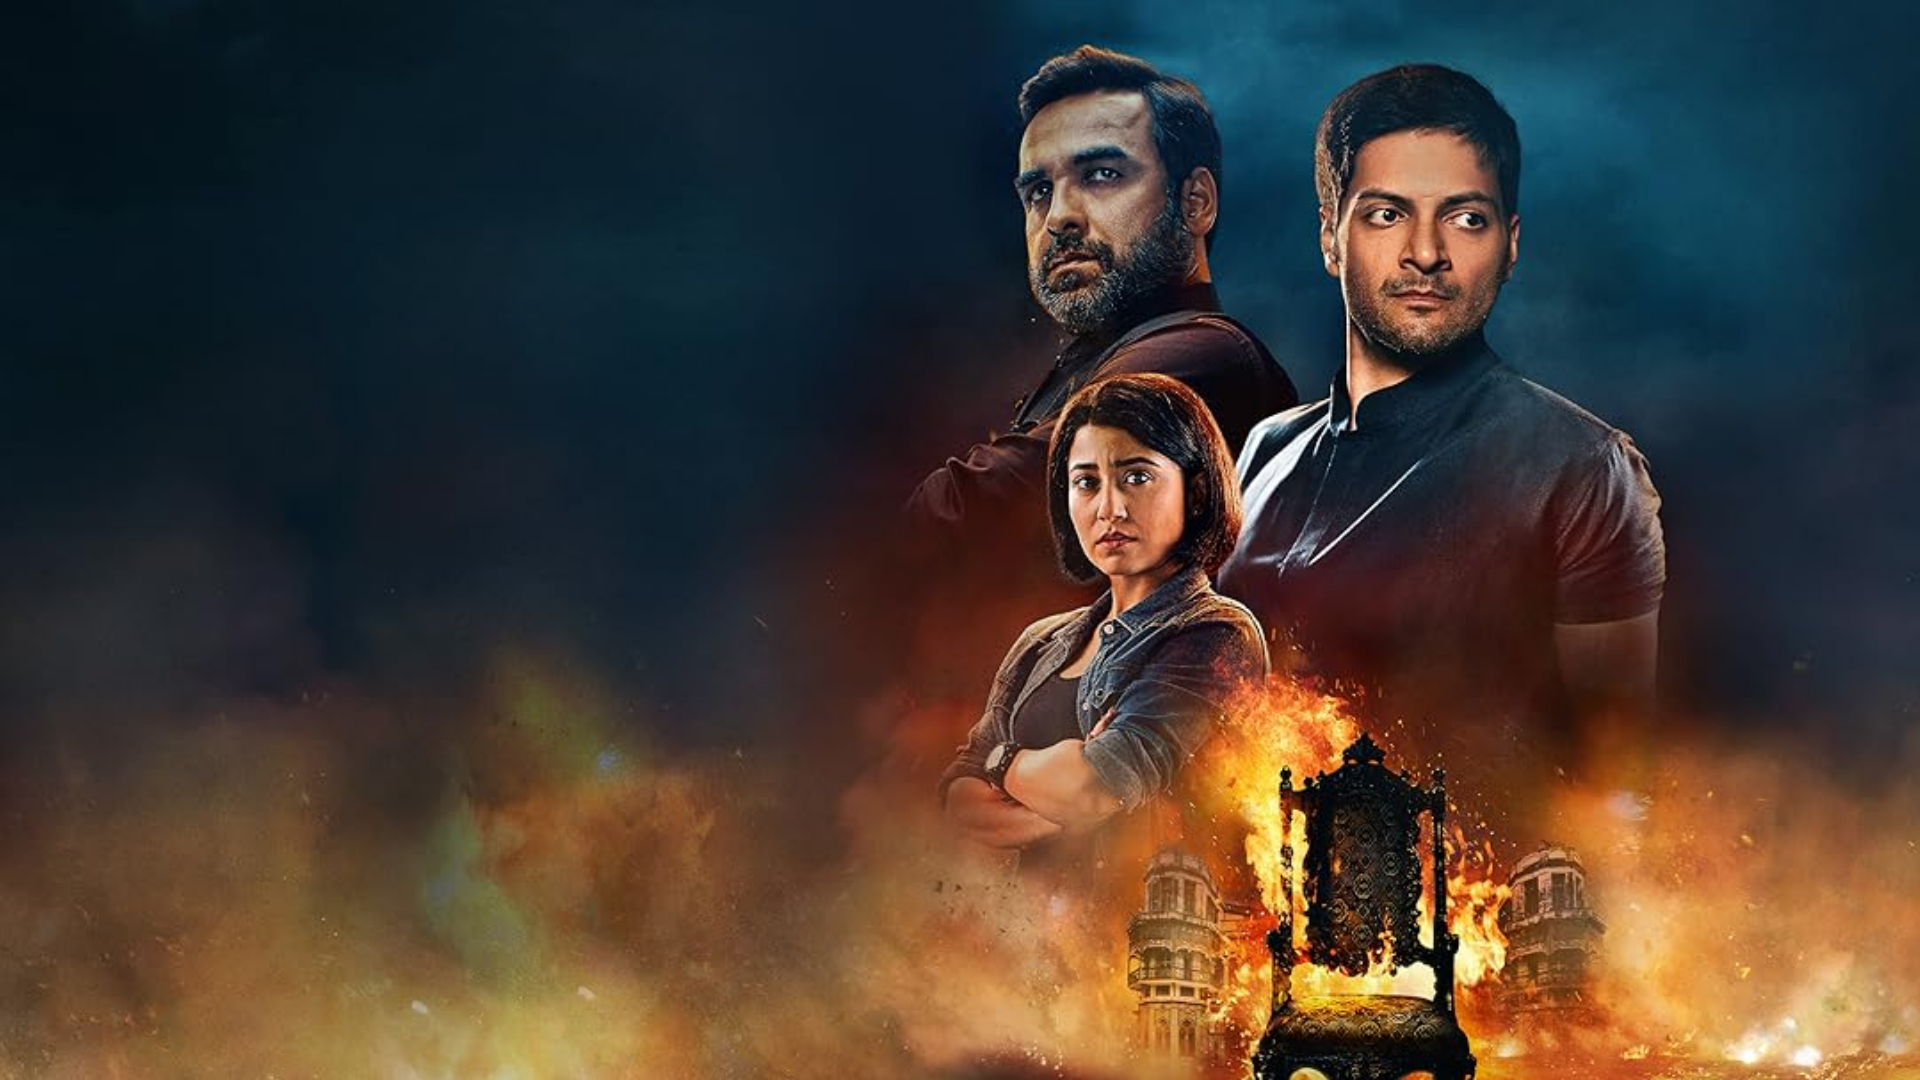 Mirzapur Season 3 OUT: How To Watch It For Free? Check Out The Details Here